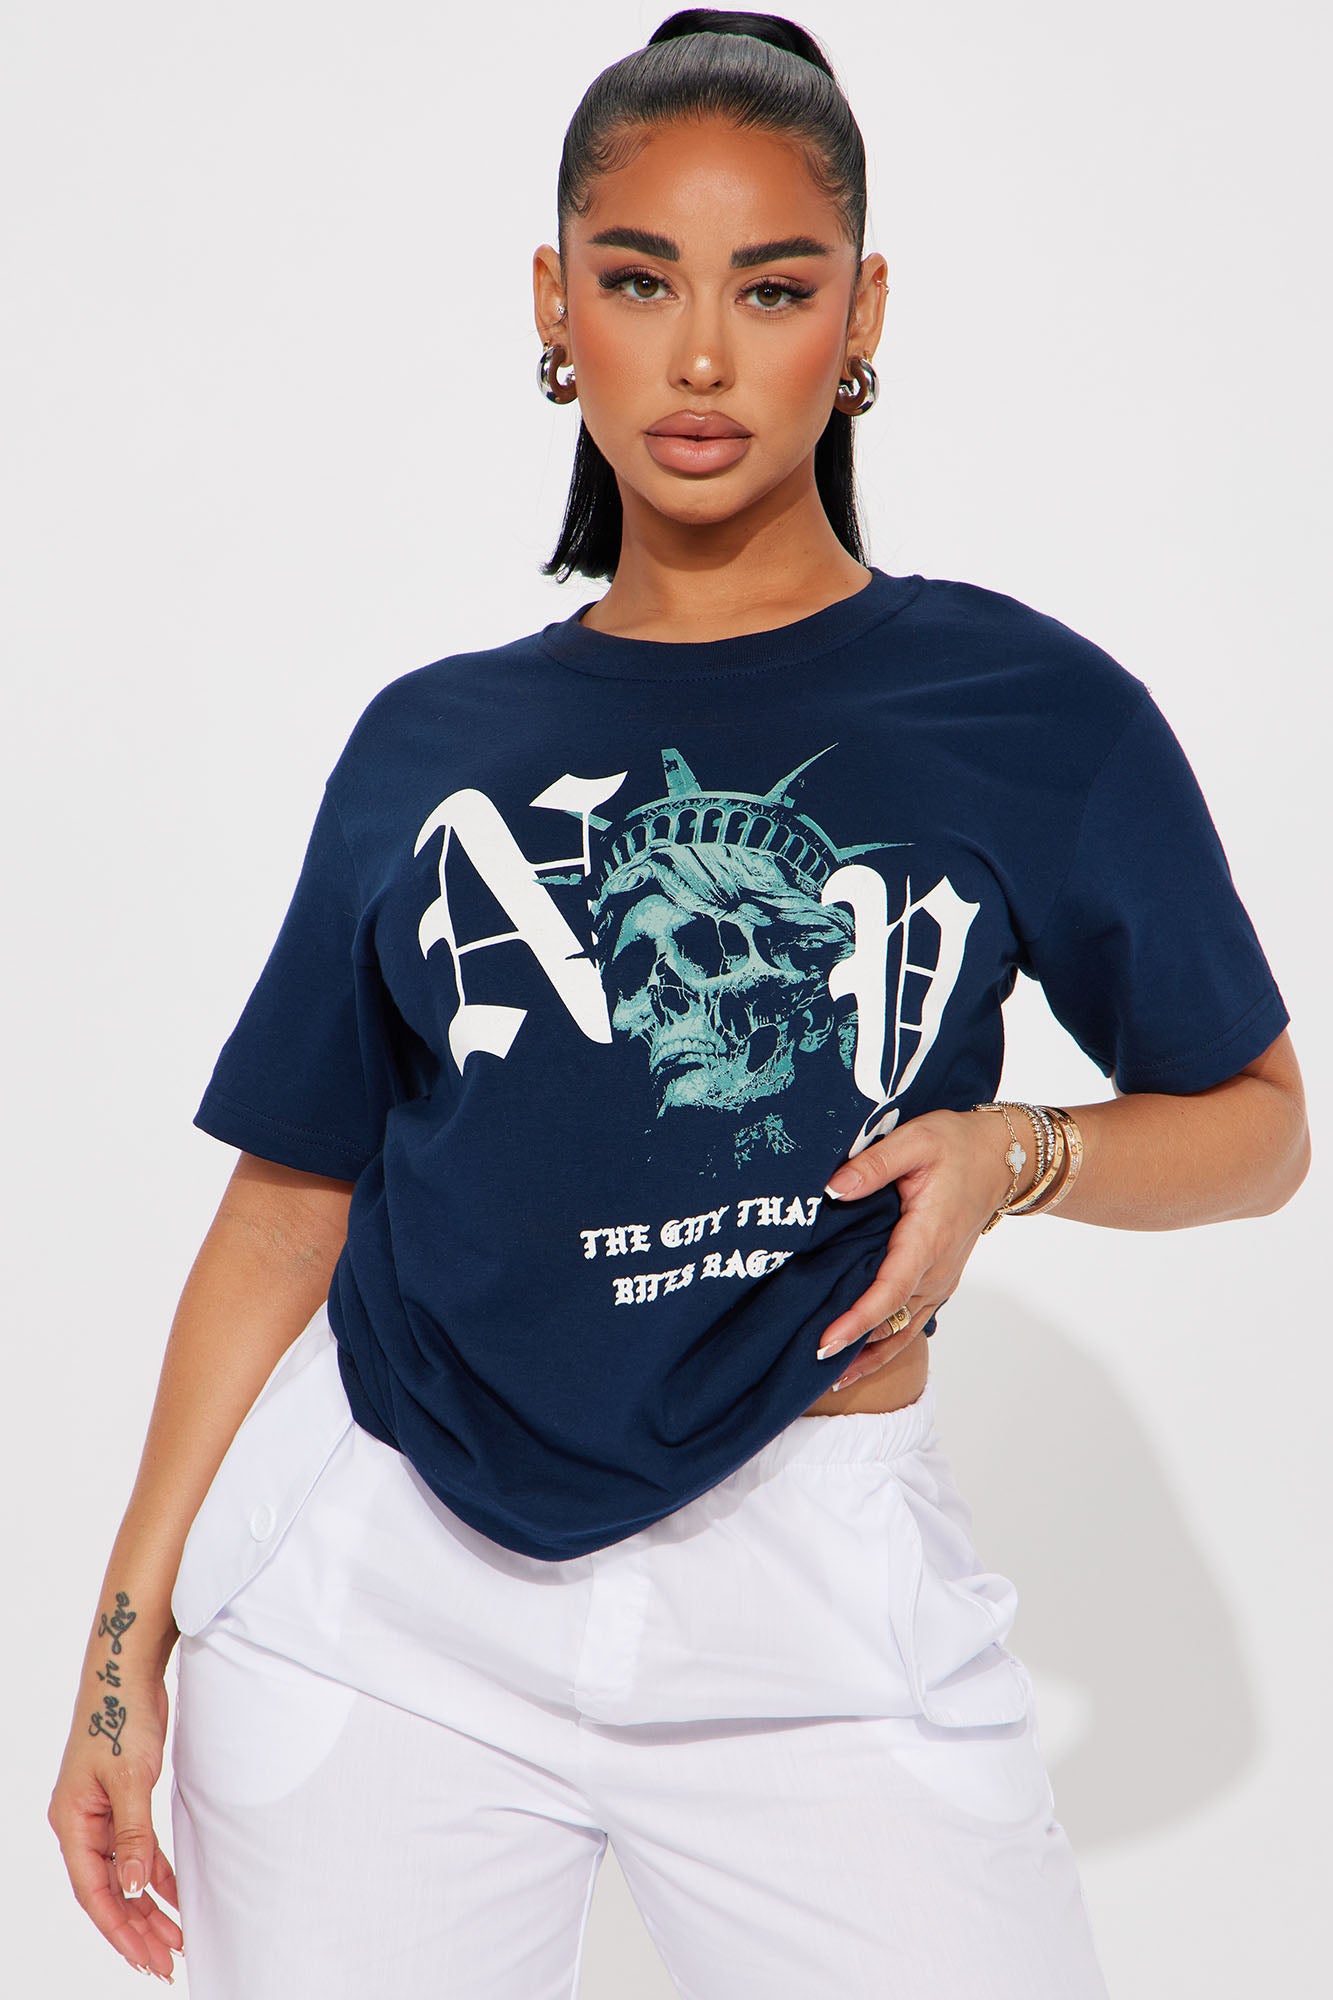 Women's New York Bites Back Graphic Tee Shirt in Navy Blue Size Large by Fashion Nova